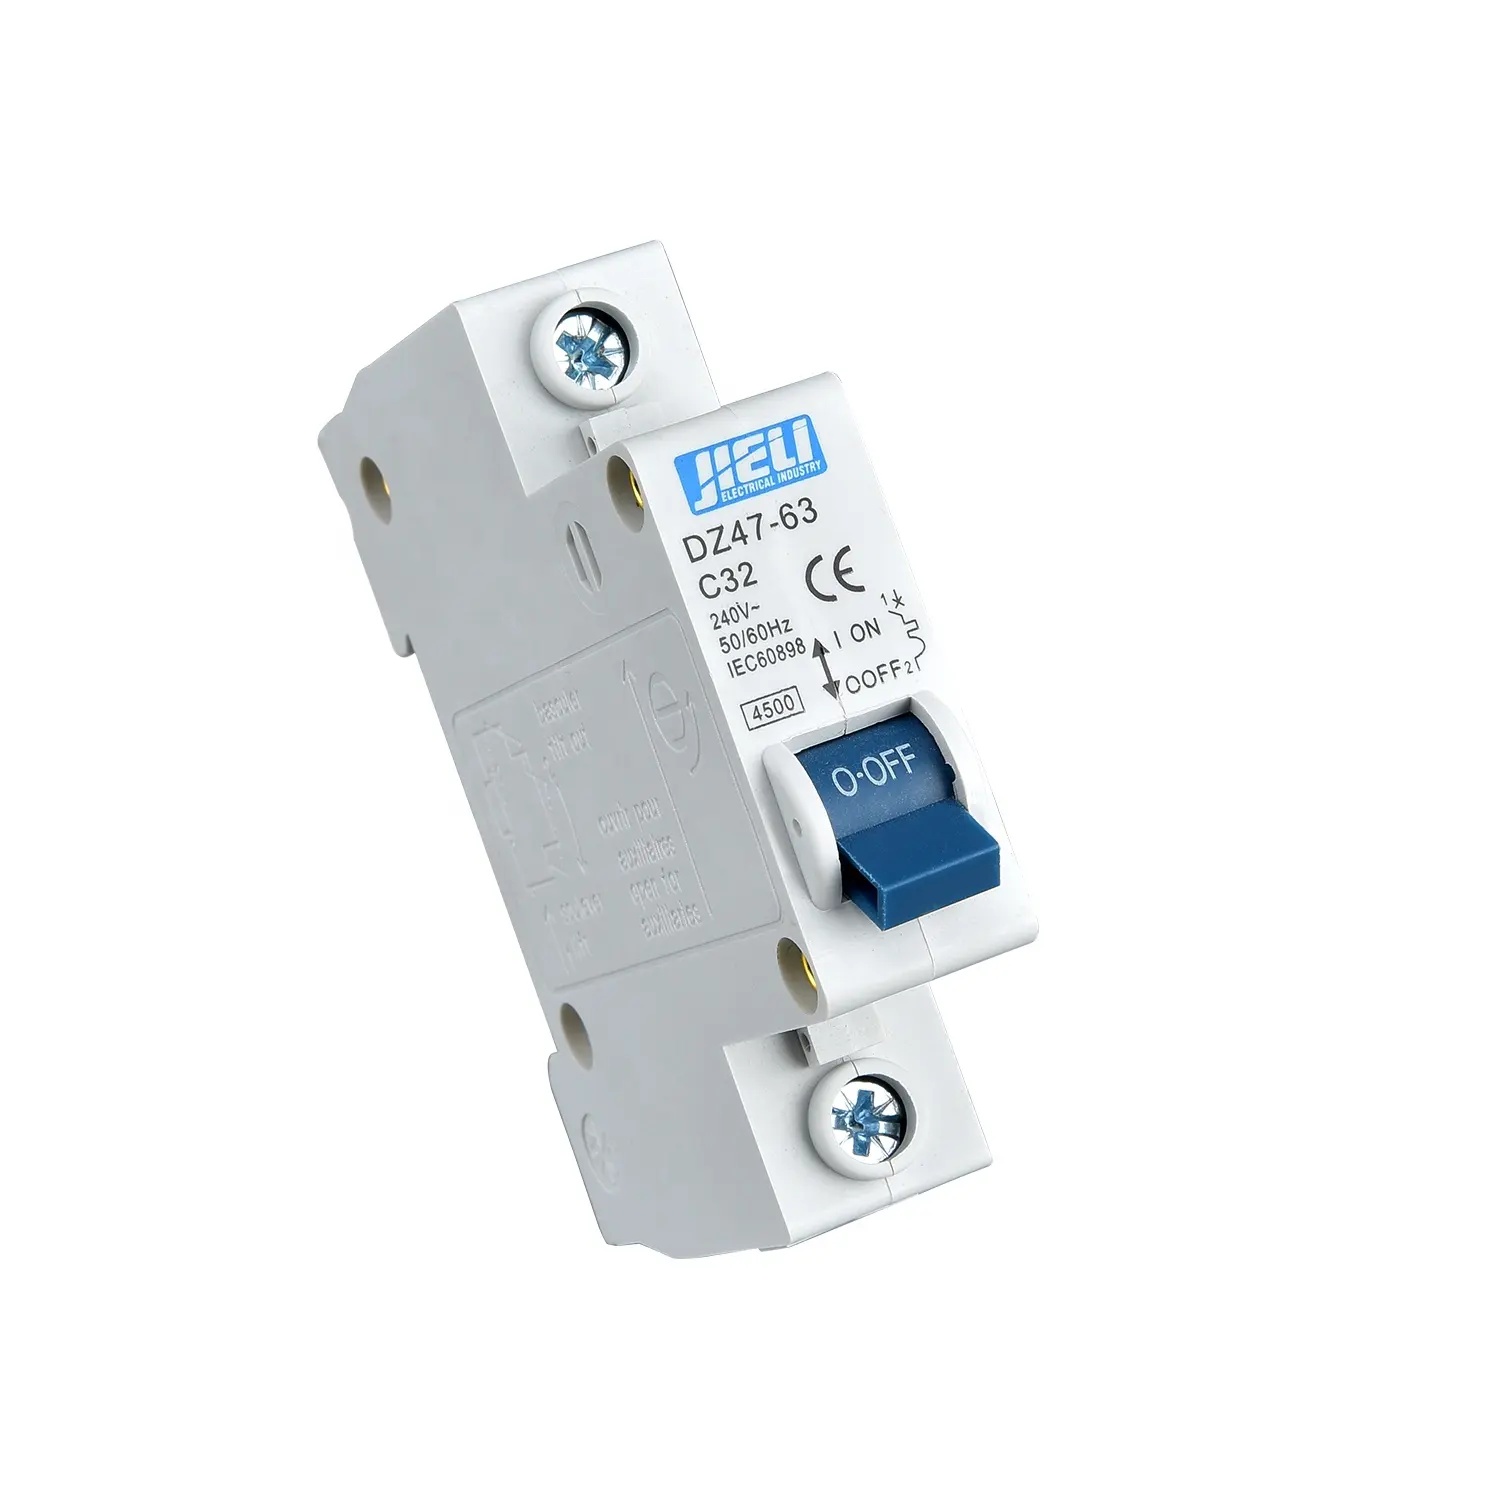 JIELI SCM environmental protection plastic air circuit breaker with protection overload and short circuit protection